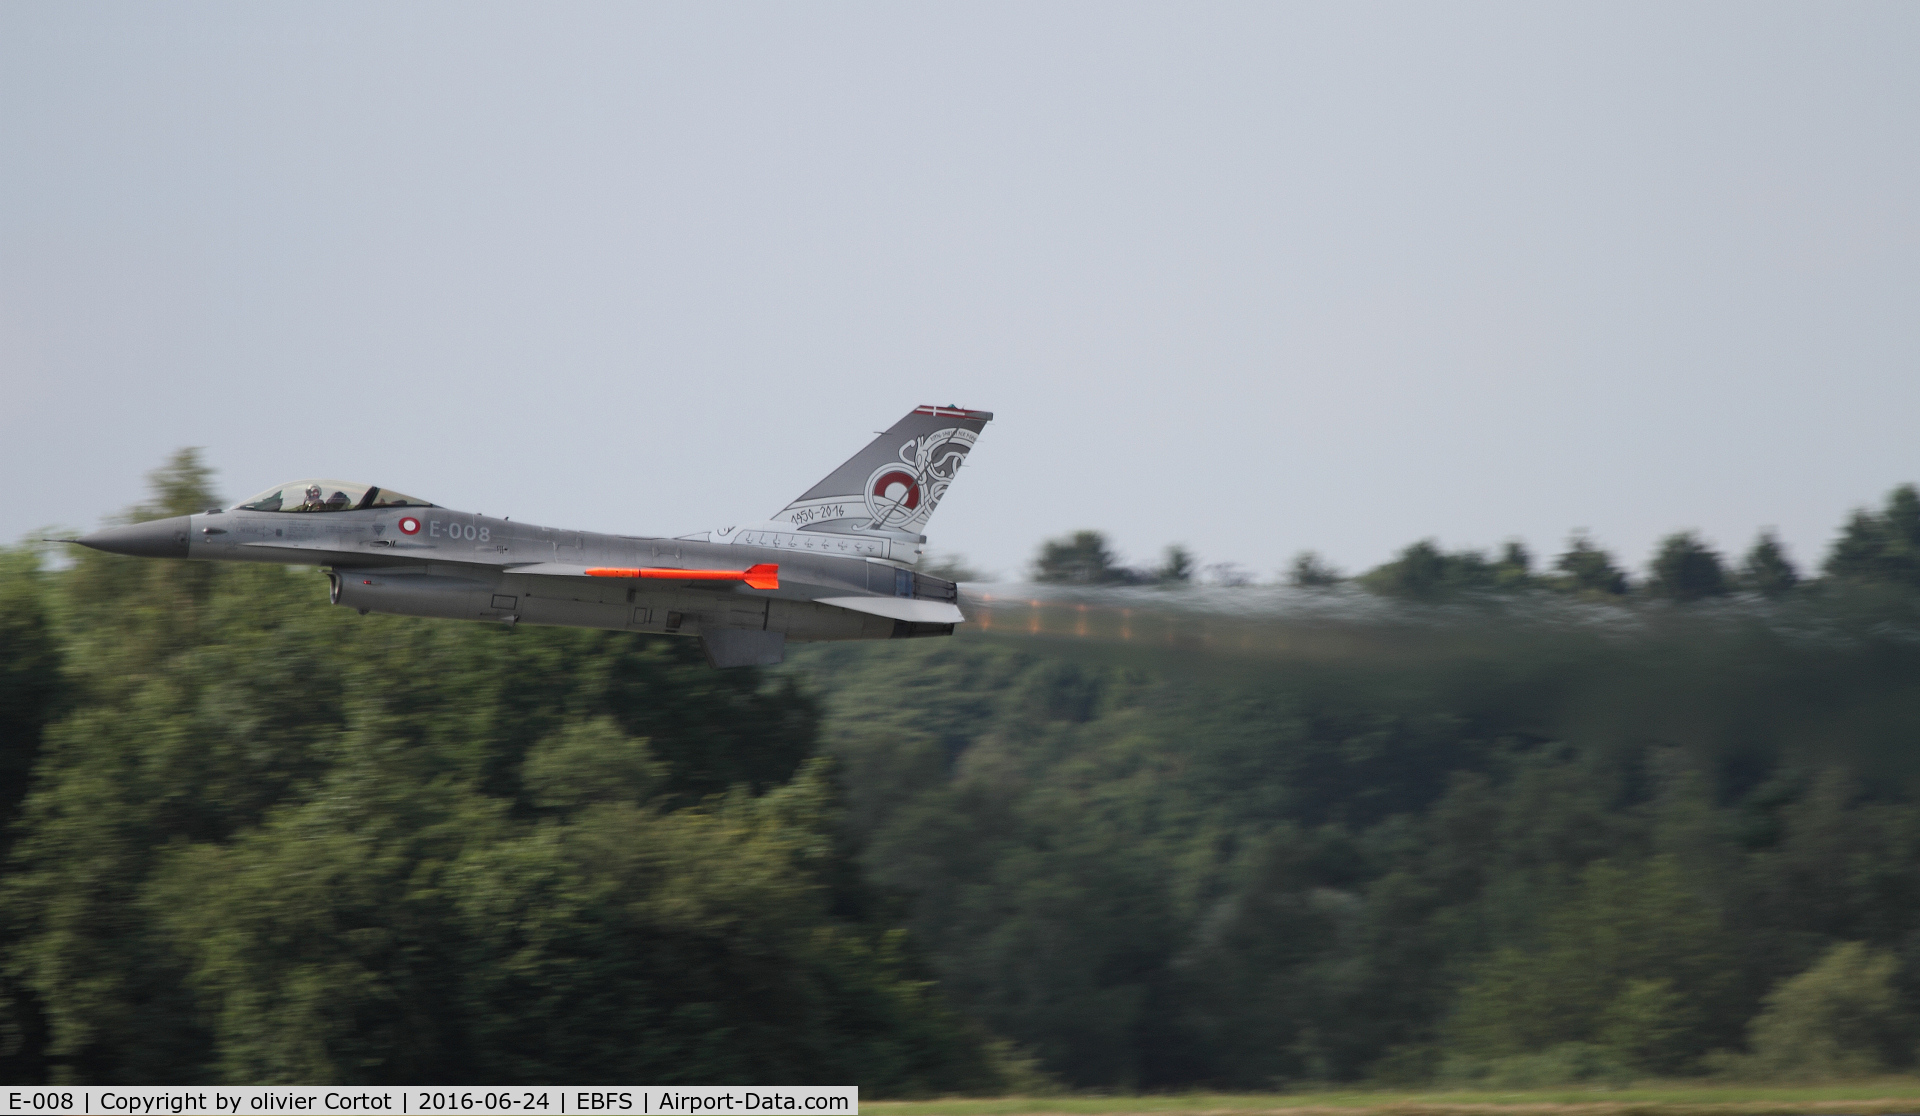 E-008, Fokker F-16AM Fighting Falcon C/N 6F-51, full power ! taking off from Florennes